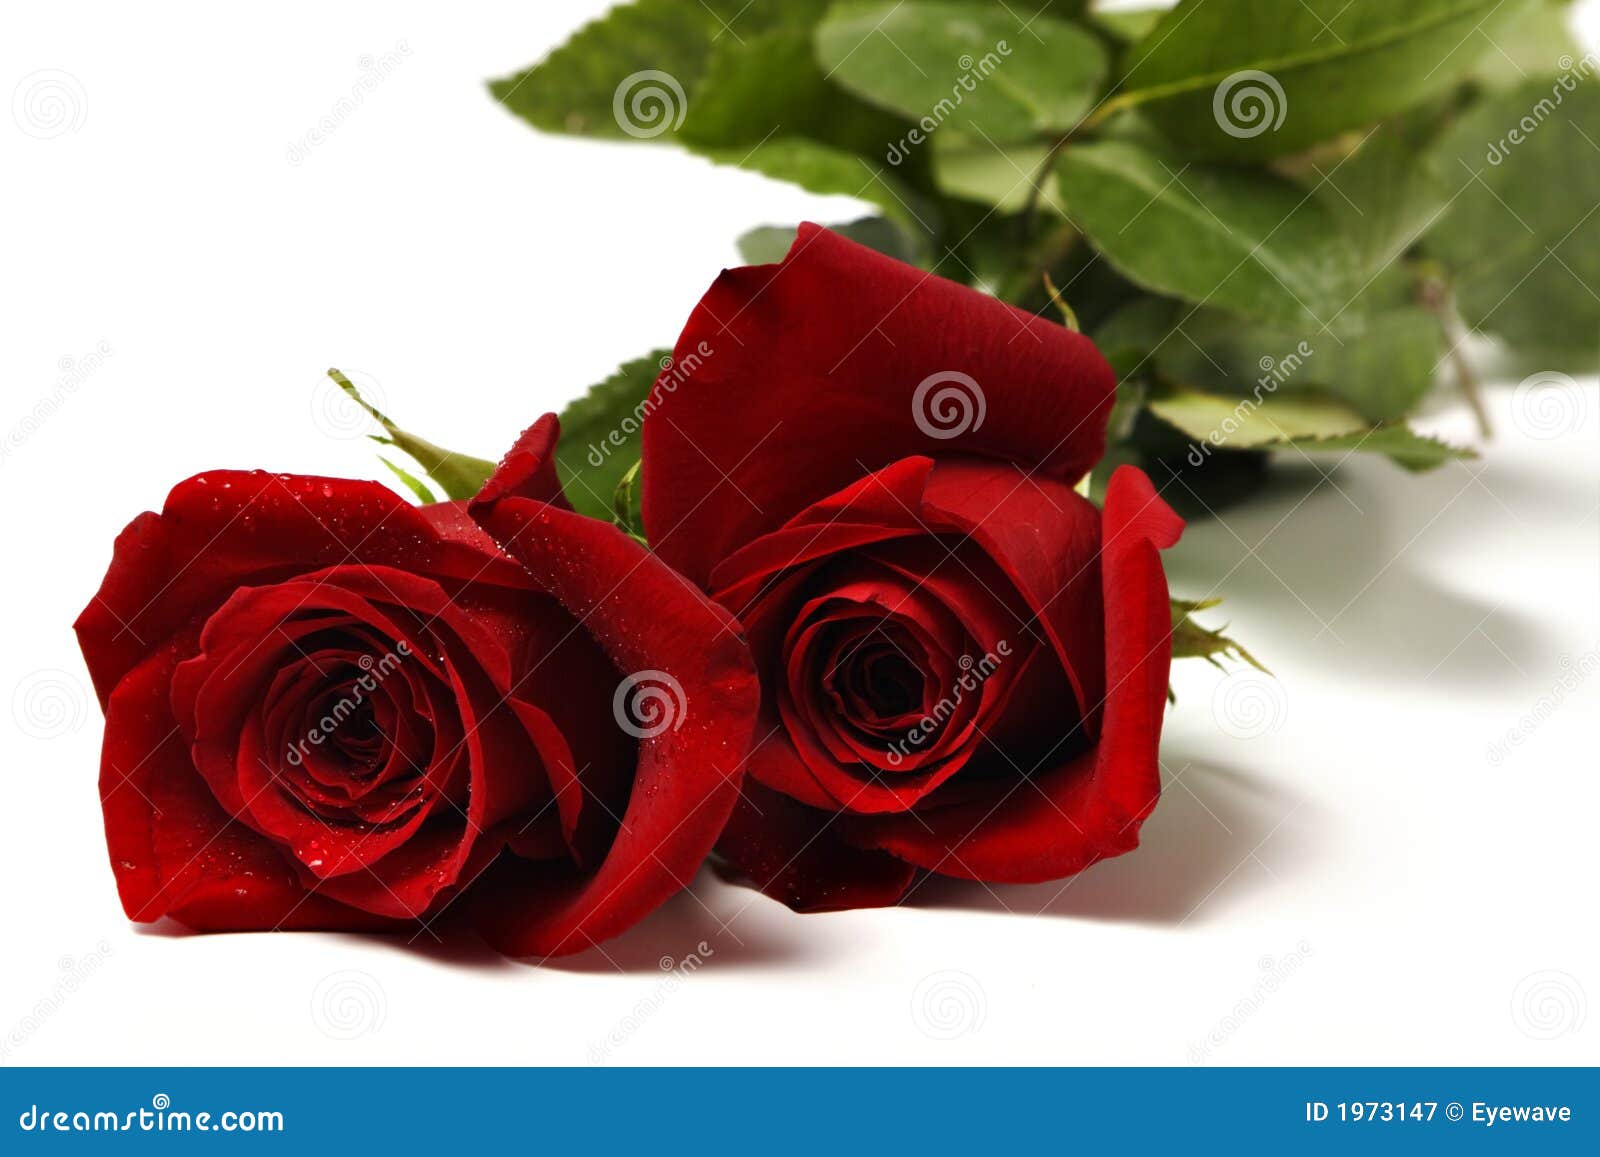 Two red roses 2 stock image. Image of love, honeymoon - 1973147